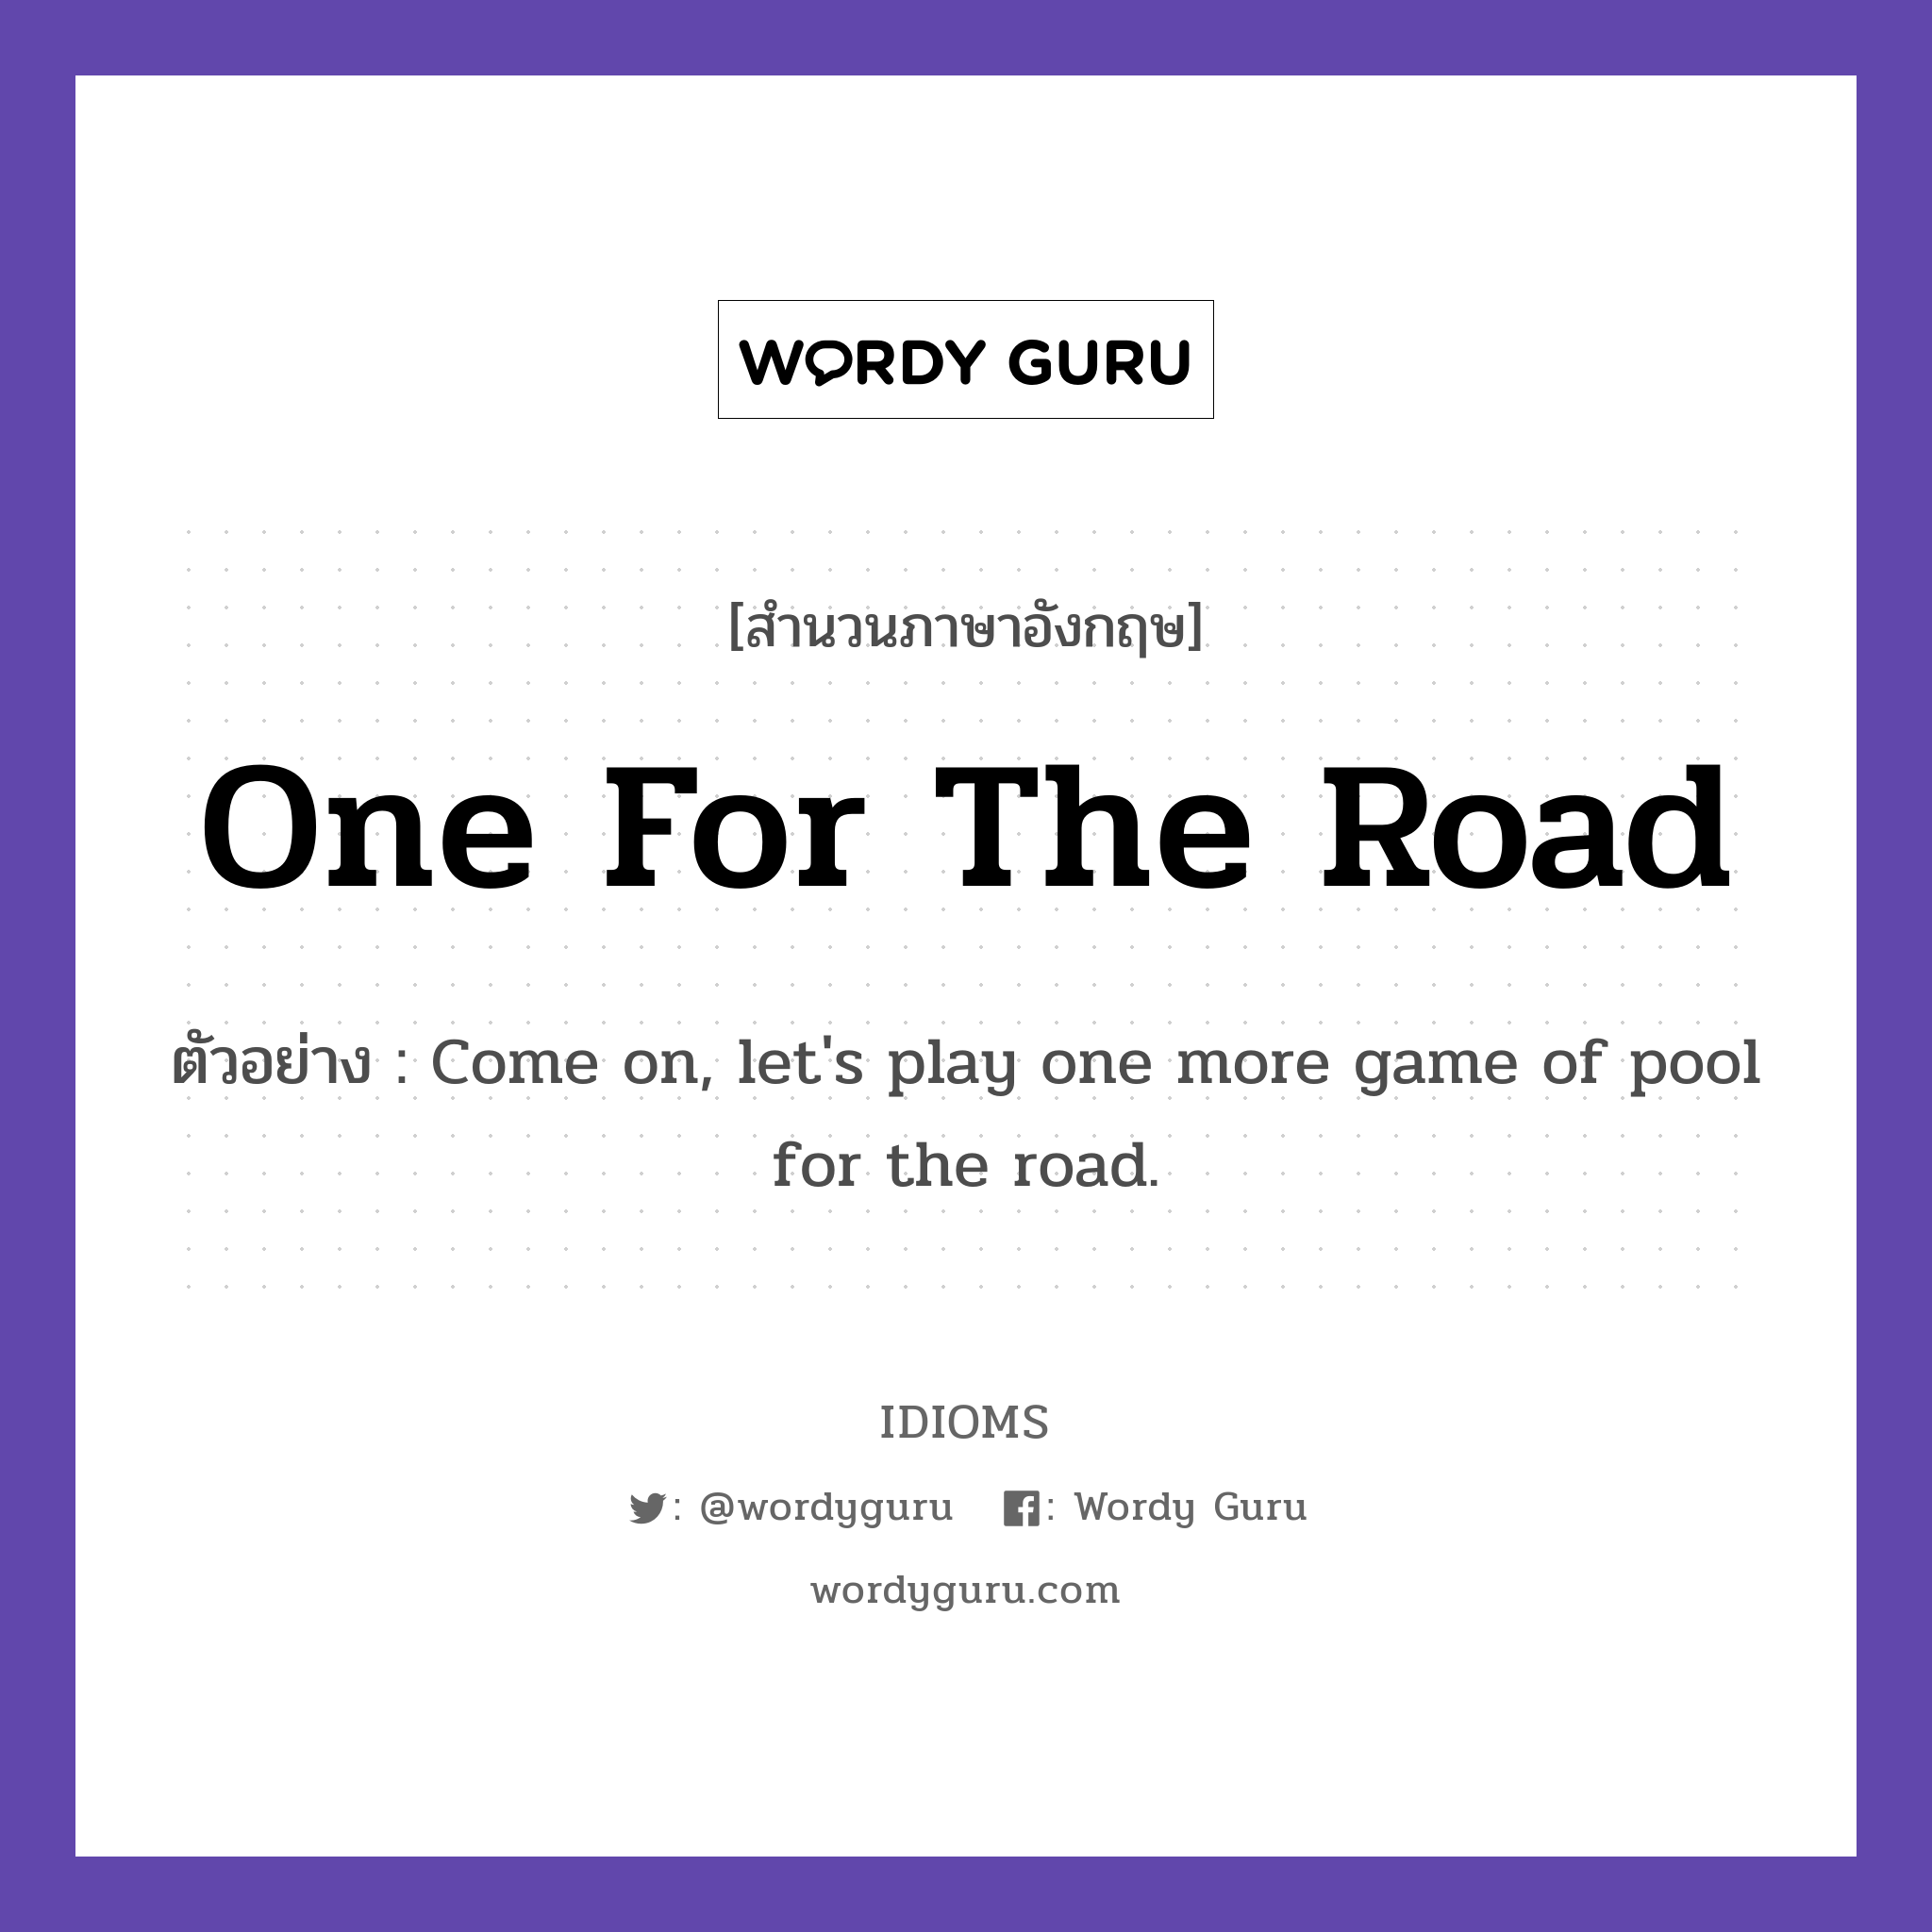 One For The Road แปลว่า?, สำนวนภาษาอังกฤษ One For The Road ตัวอย่าง Come on, let's play one more game of pool for the road.